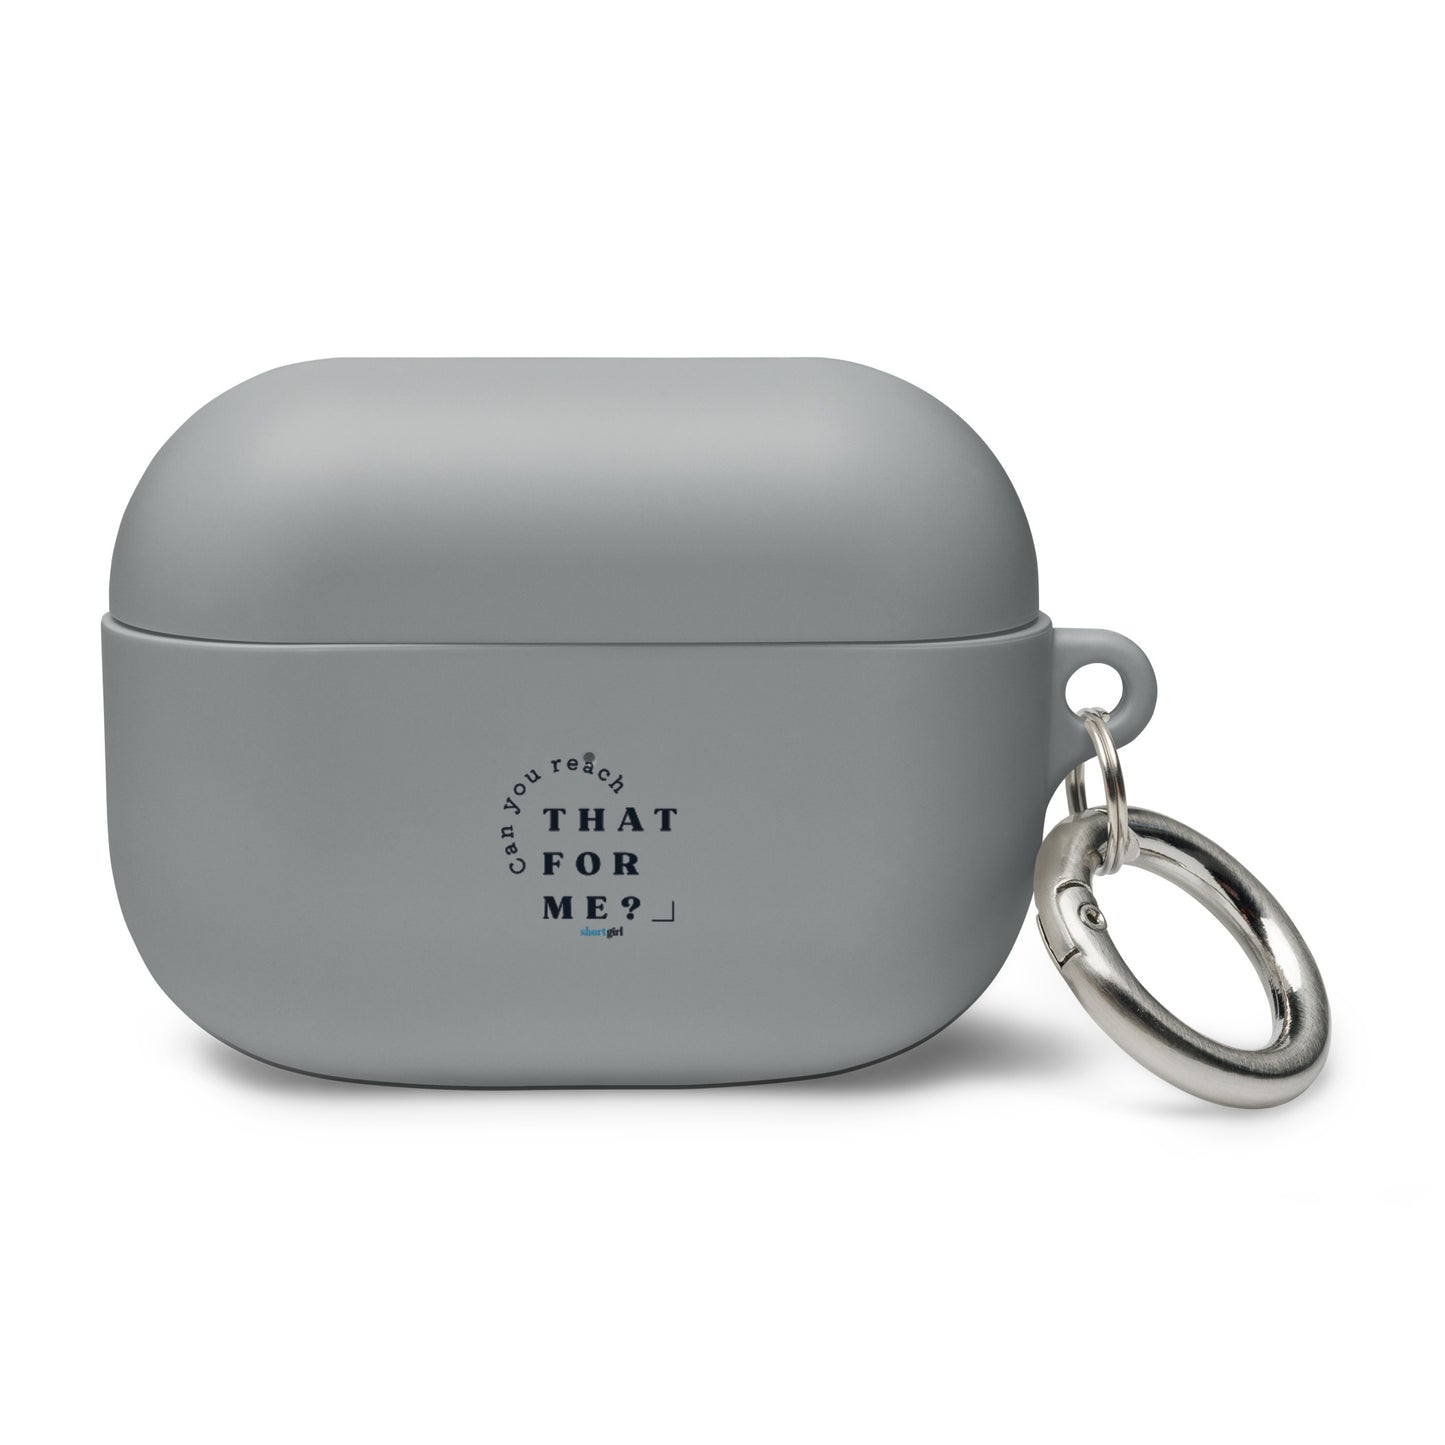 AirPods case - Can you reach that for me?